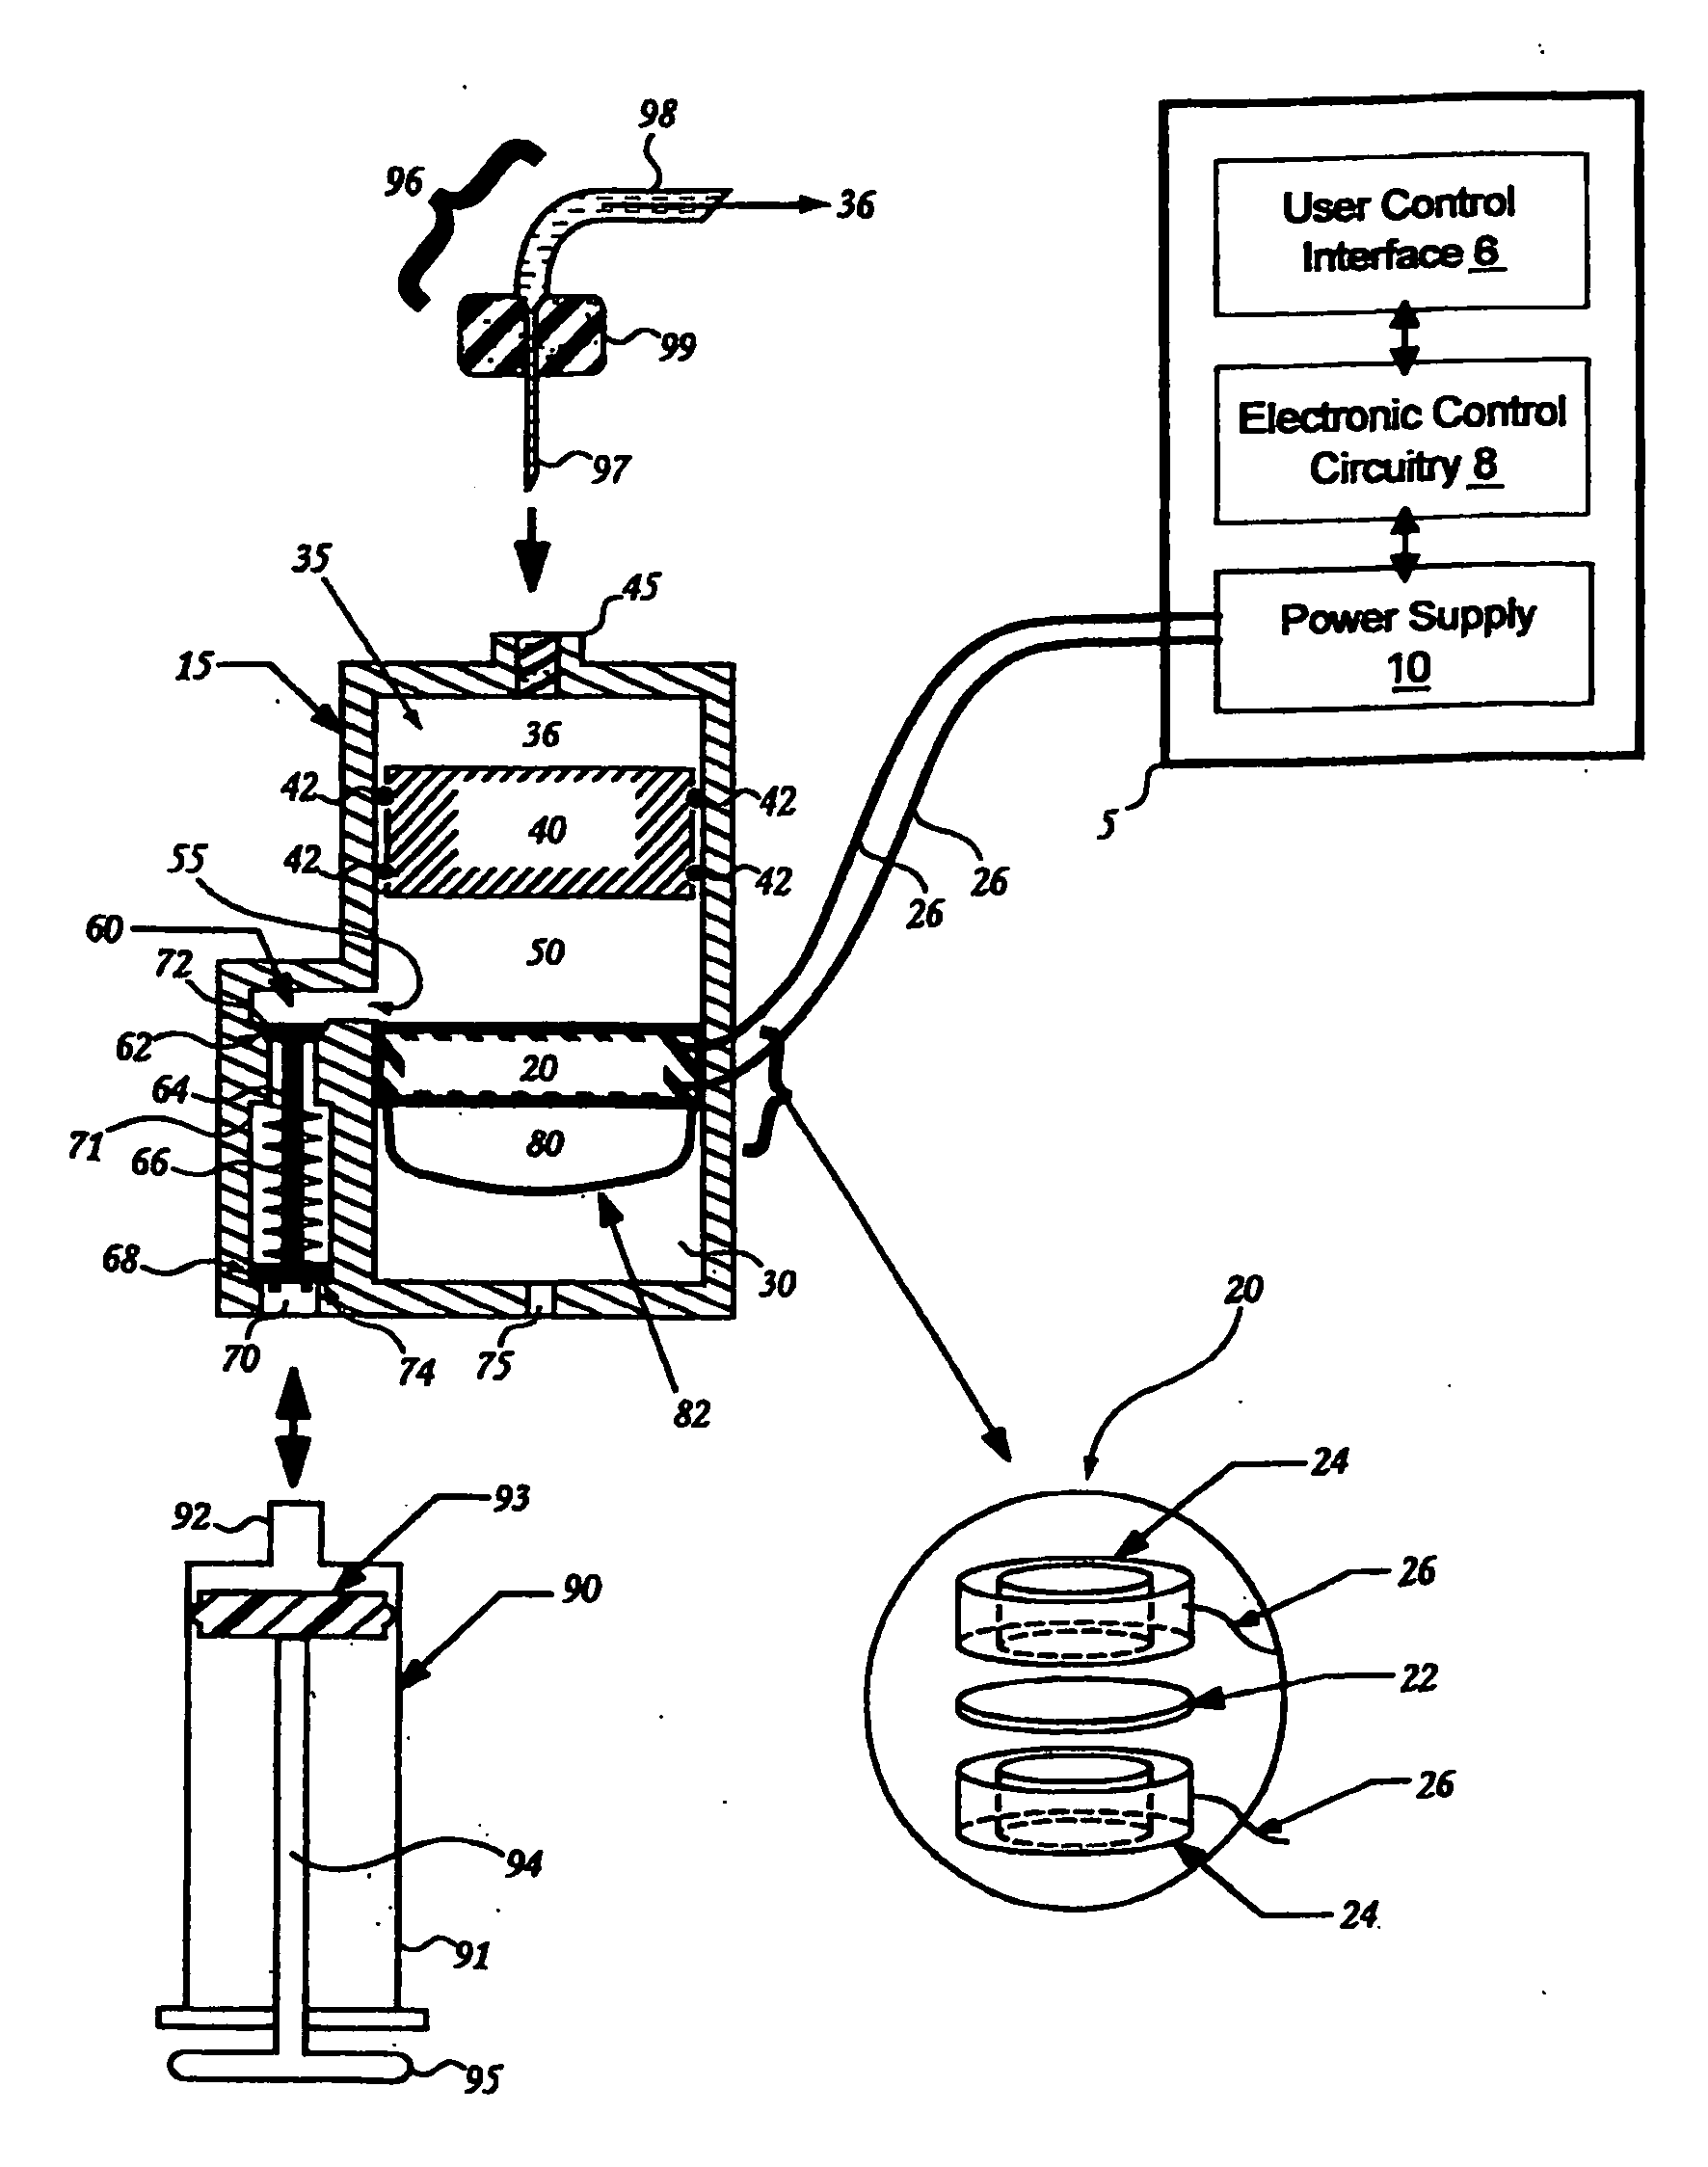 Electrokinetic pump designs and drug delivery systems